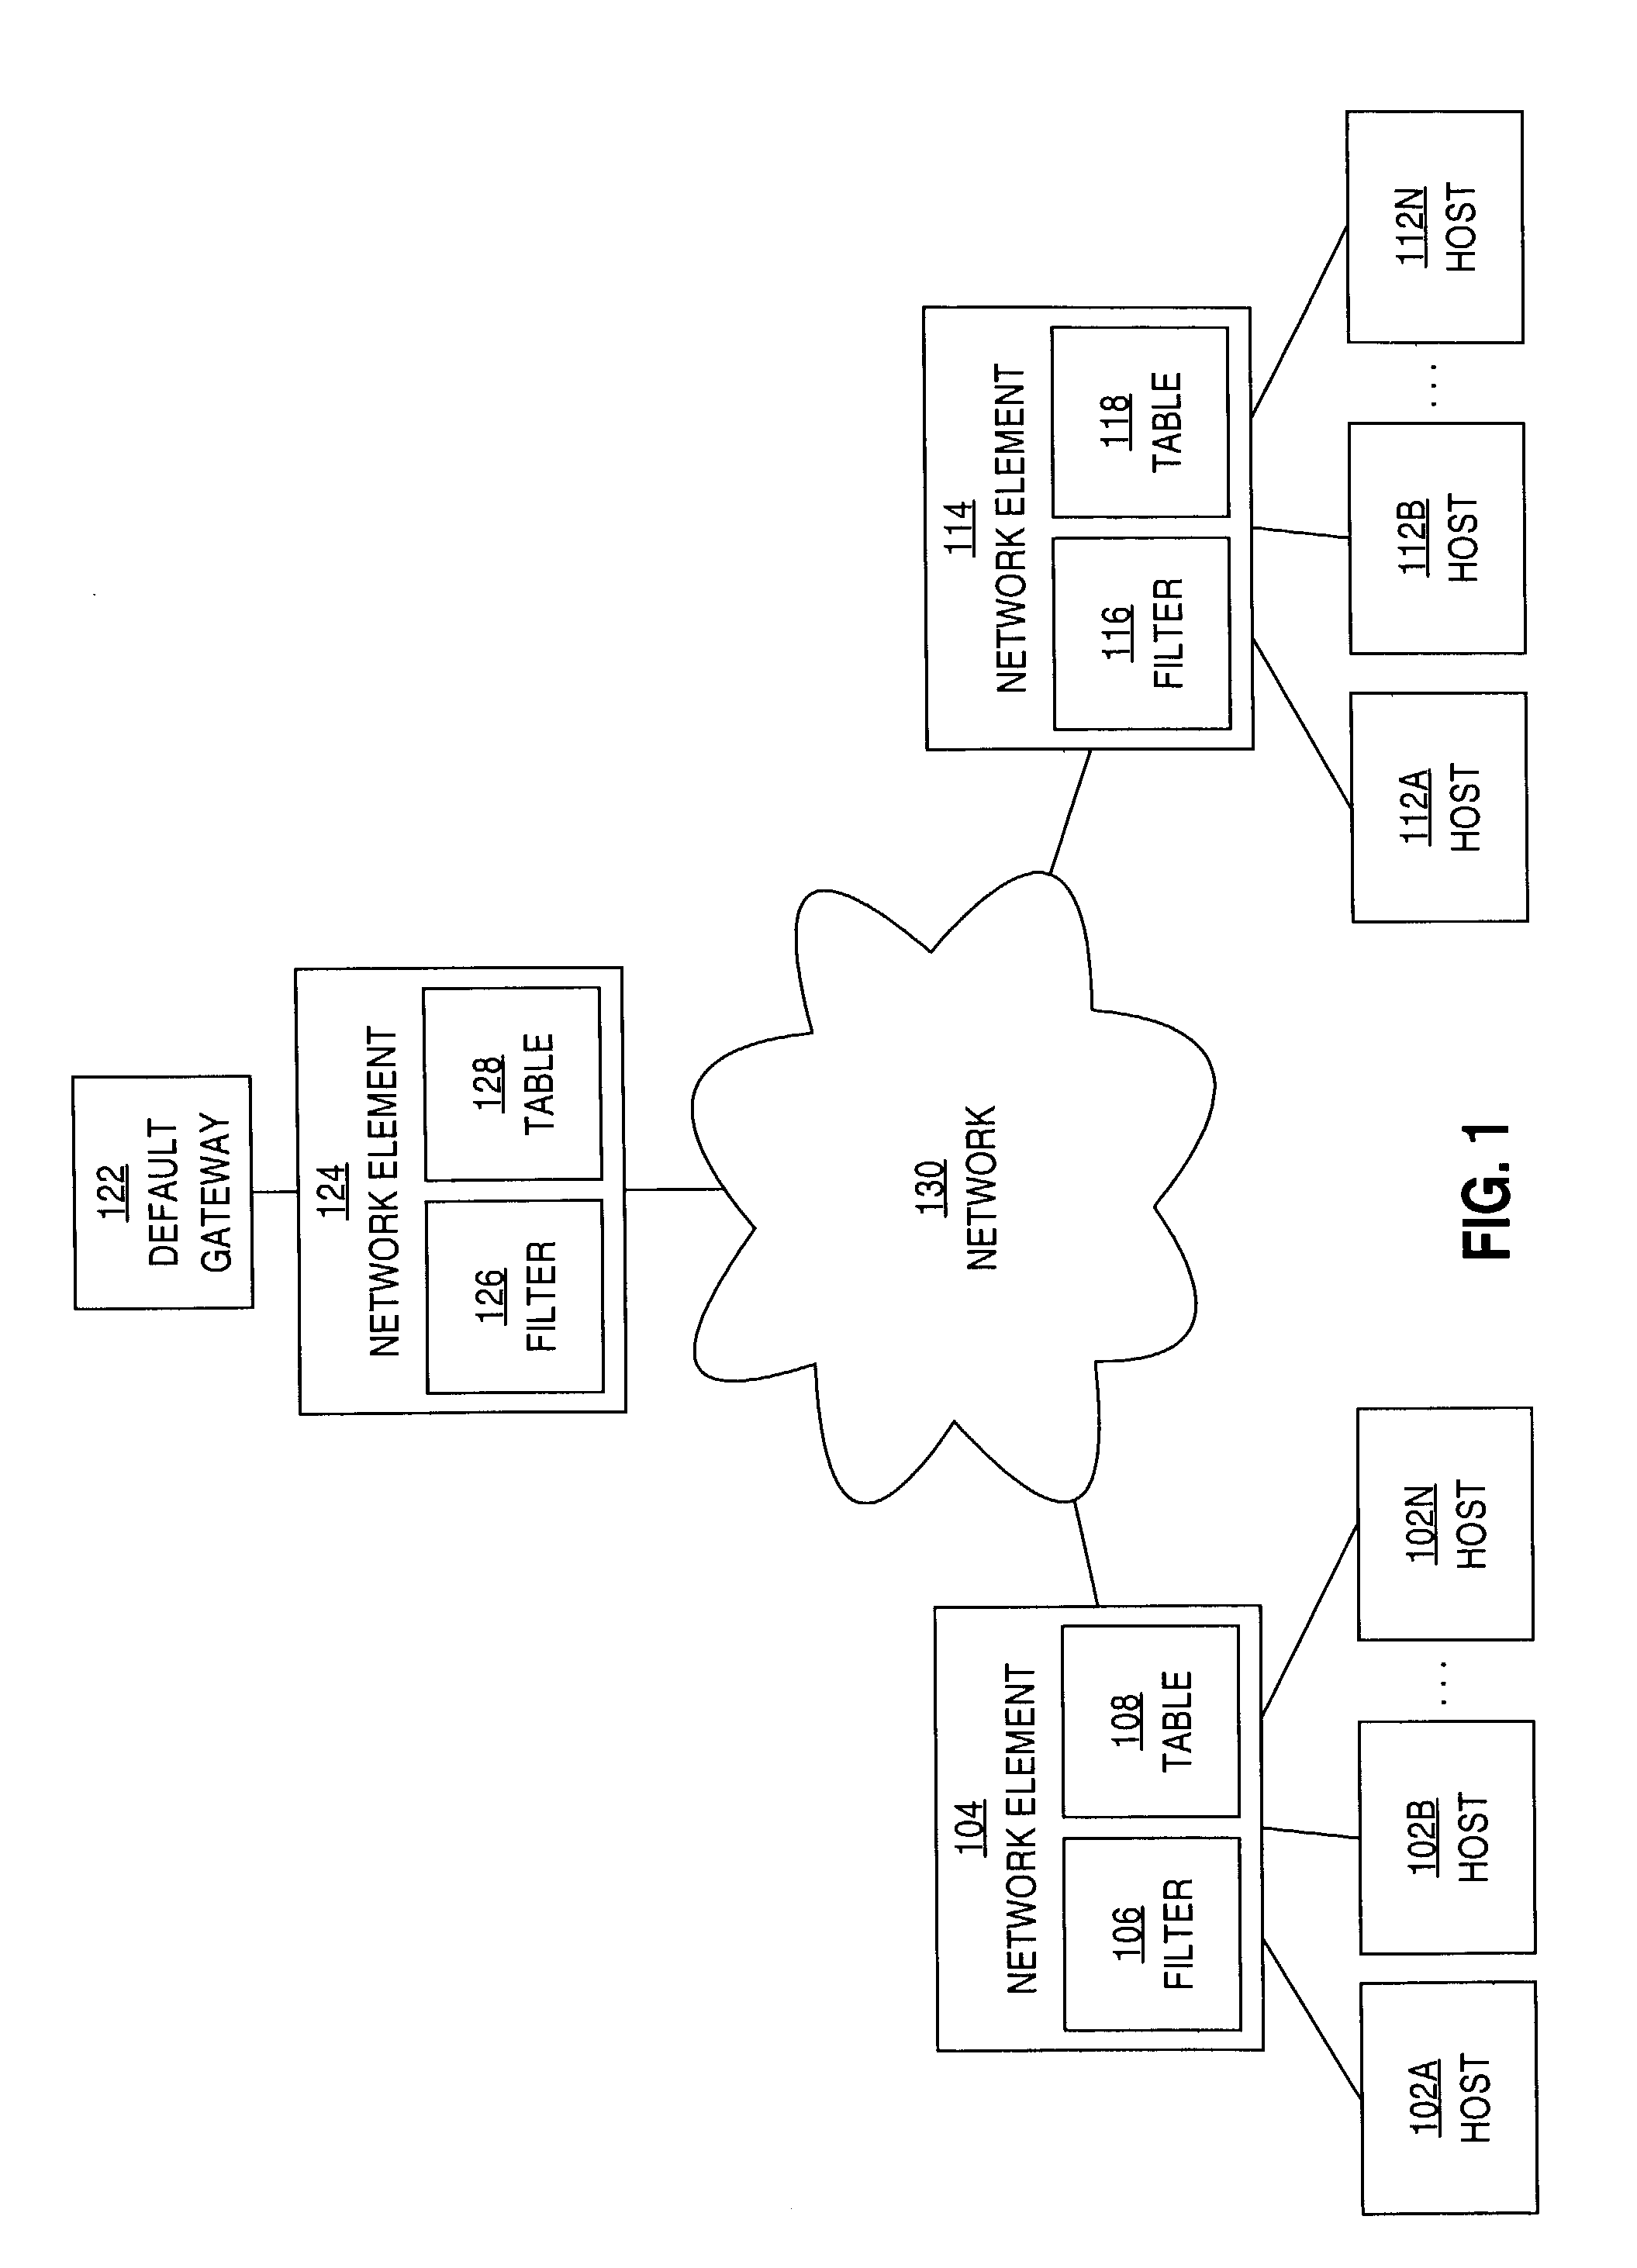 Method and apparatus for automatic filter generation and maintenance